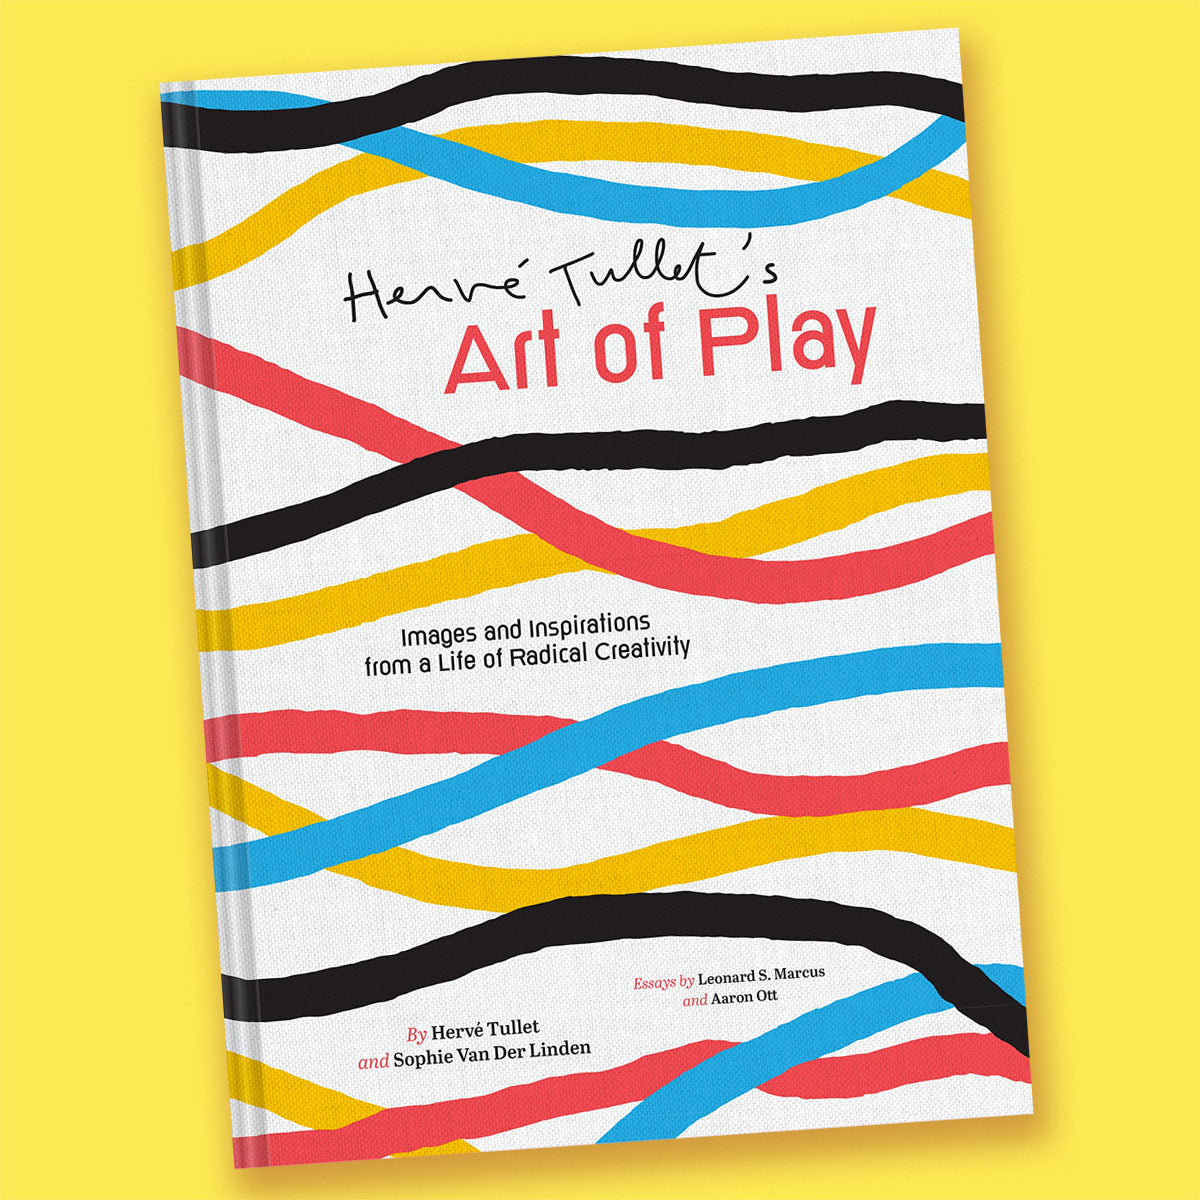 Herve Tullet's Art of Play: Images and Inspirations from a Life of